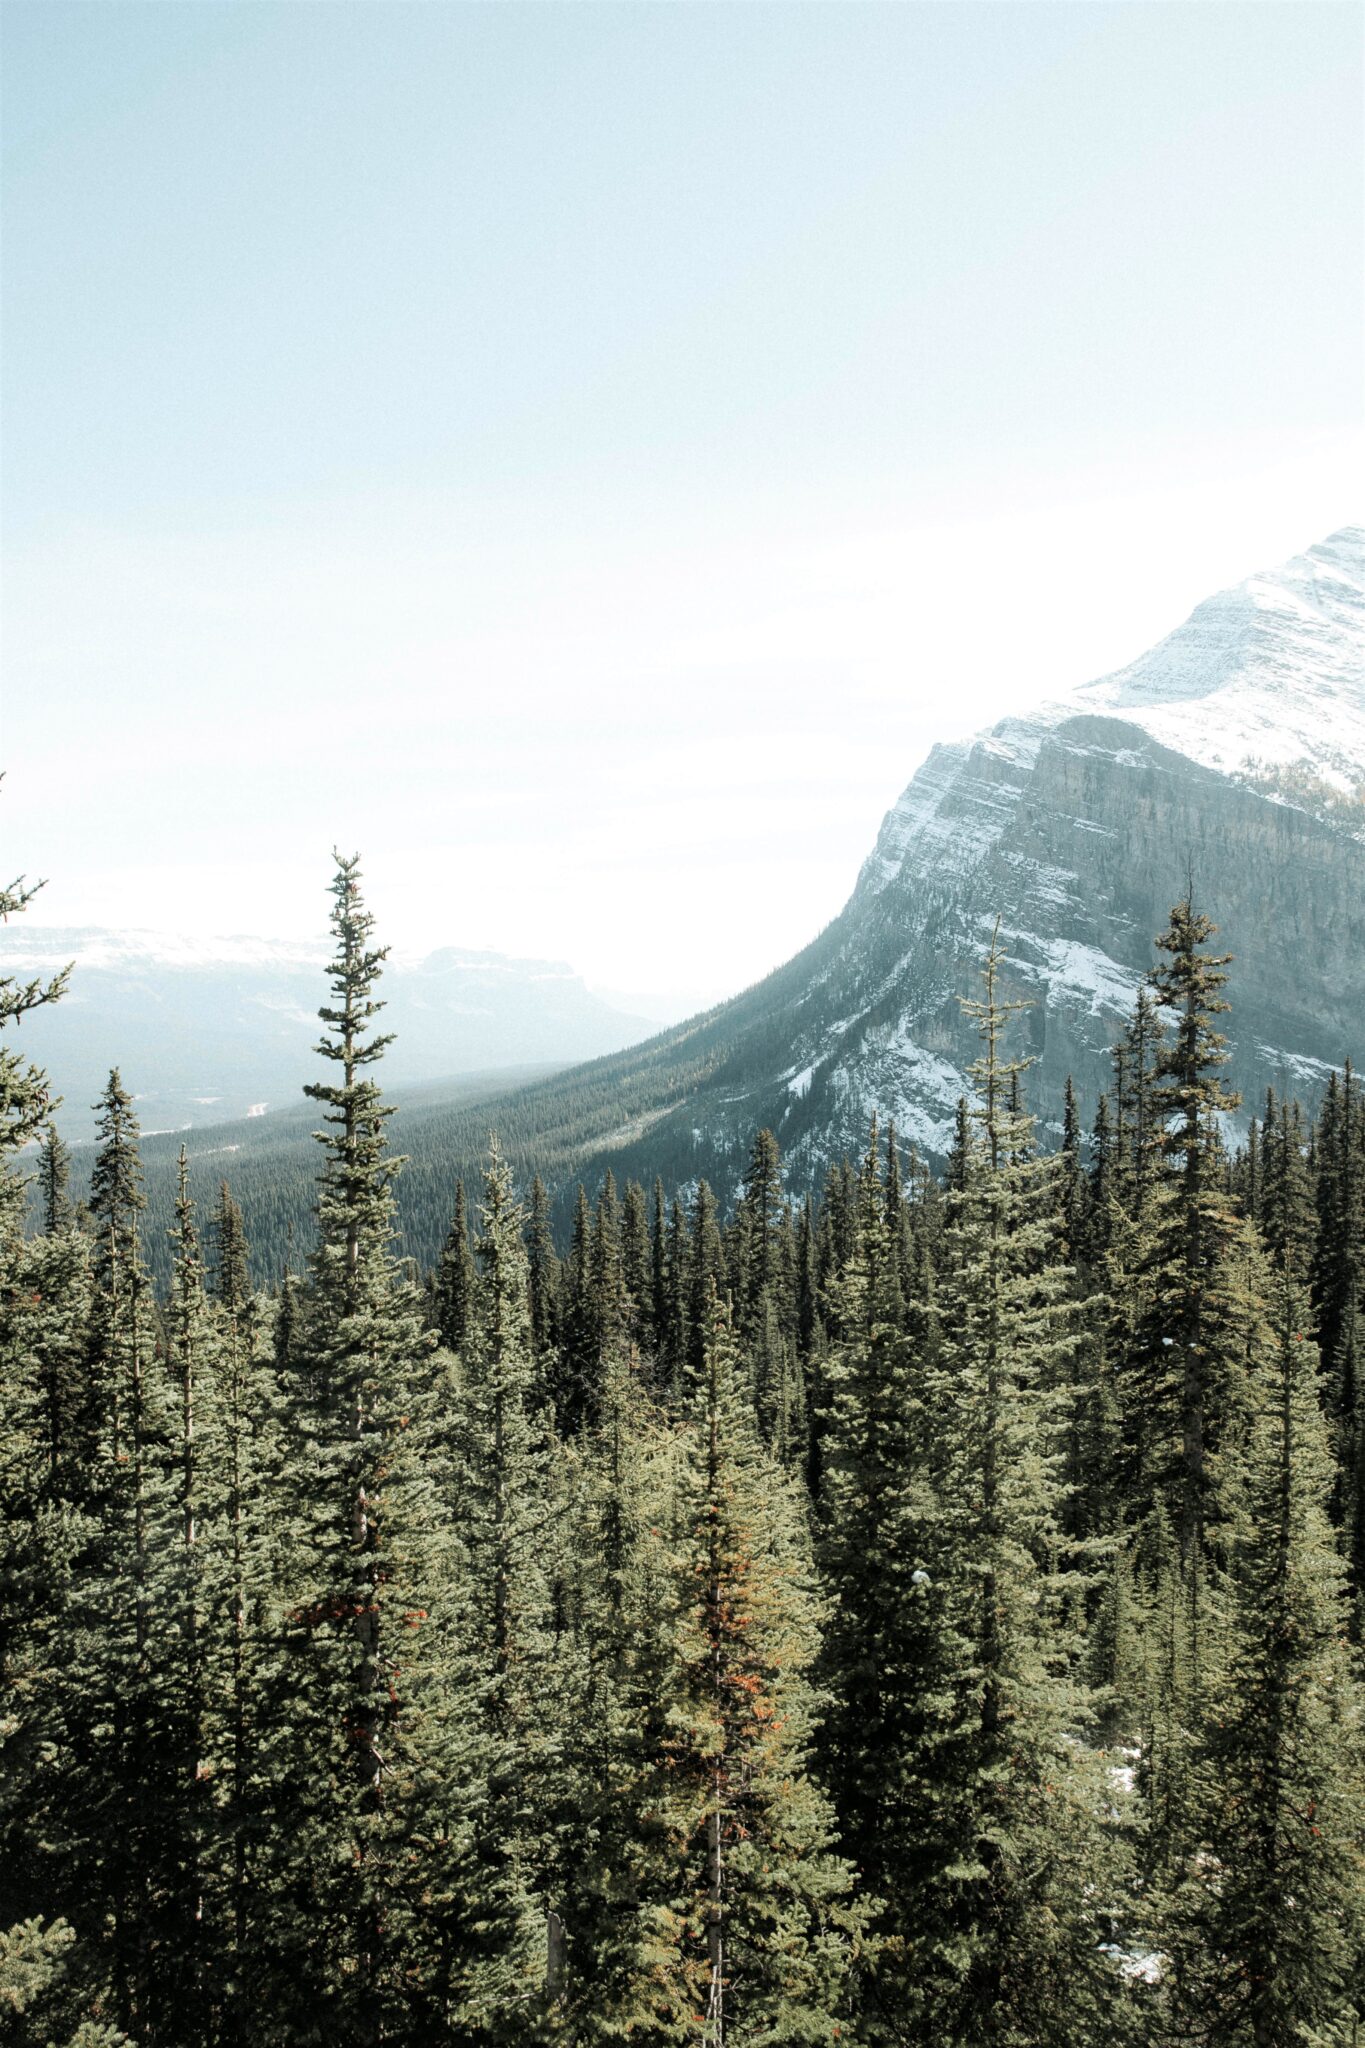 A beautiful Canadian landscape with a dense forest and a snow-covered mountain in the distance. This article covers reasons to visit or move to Canada.